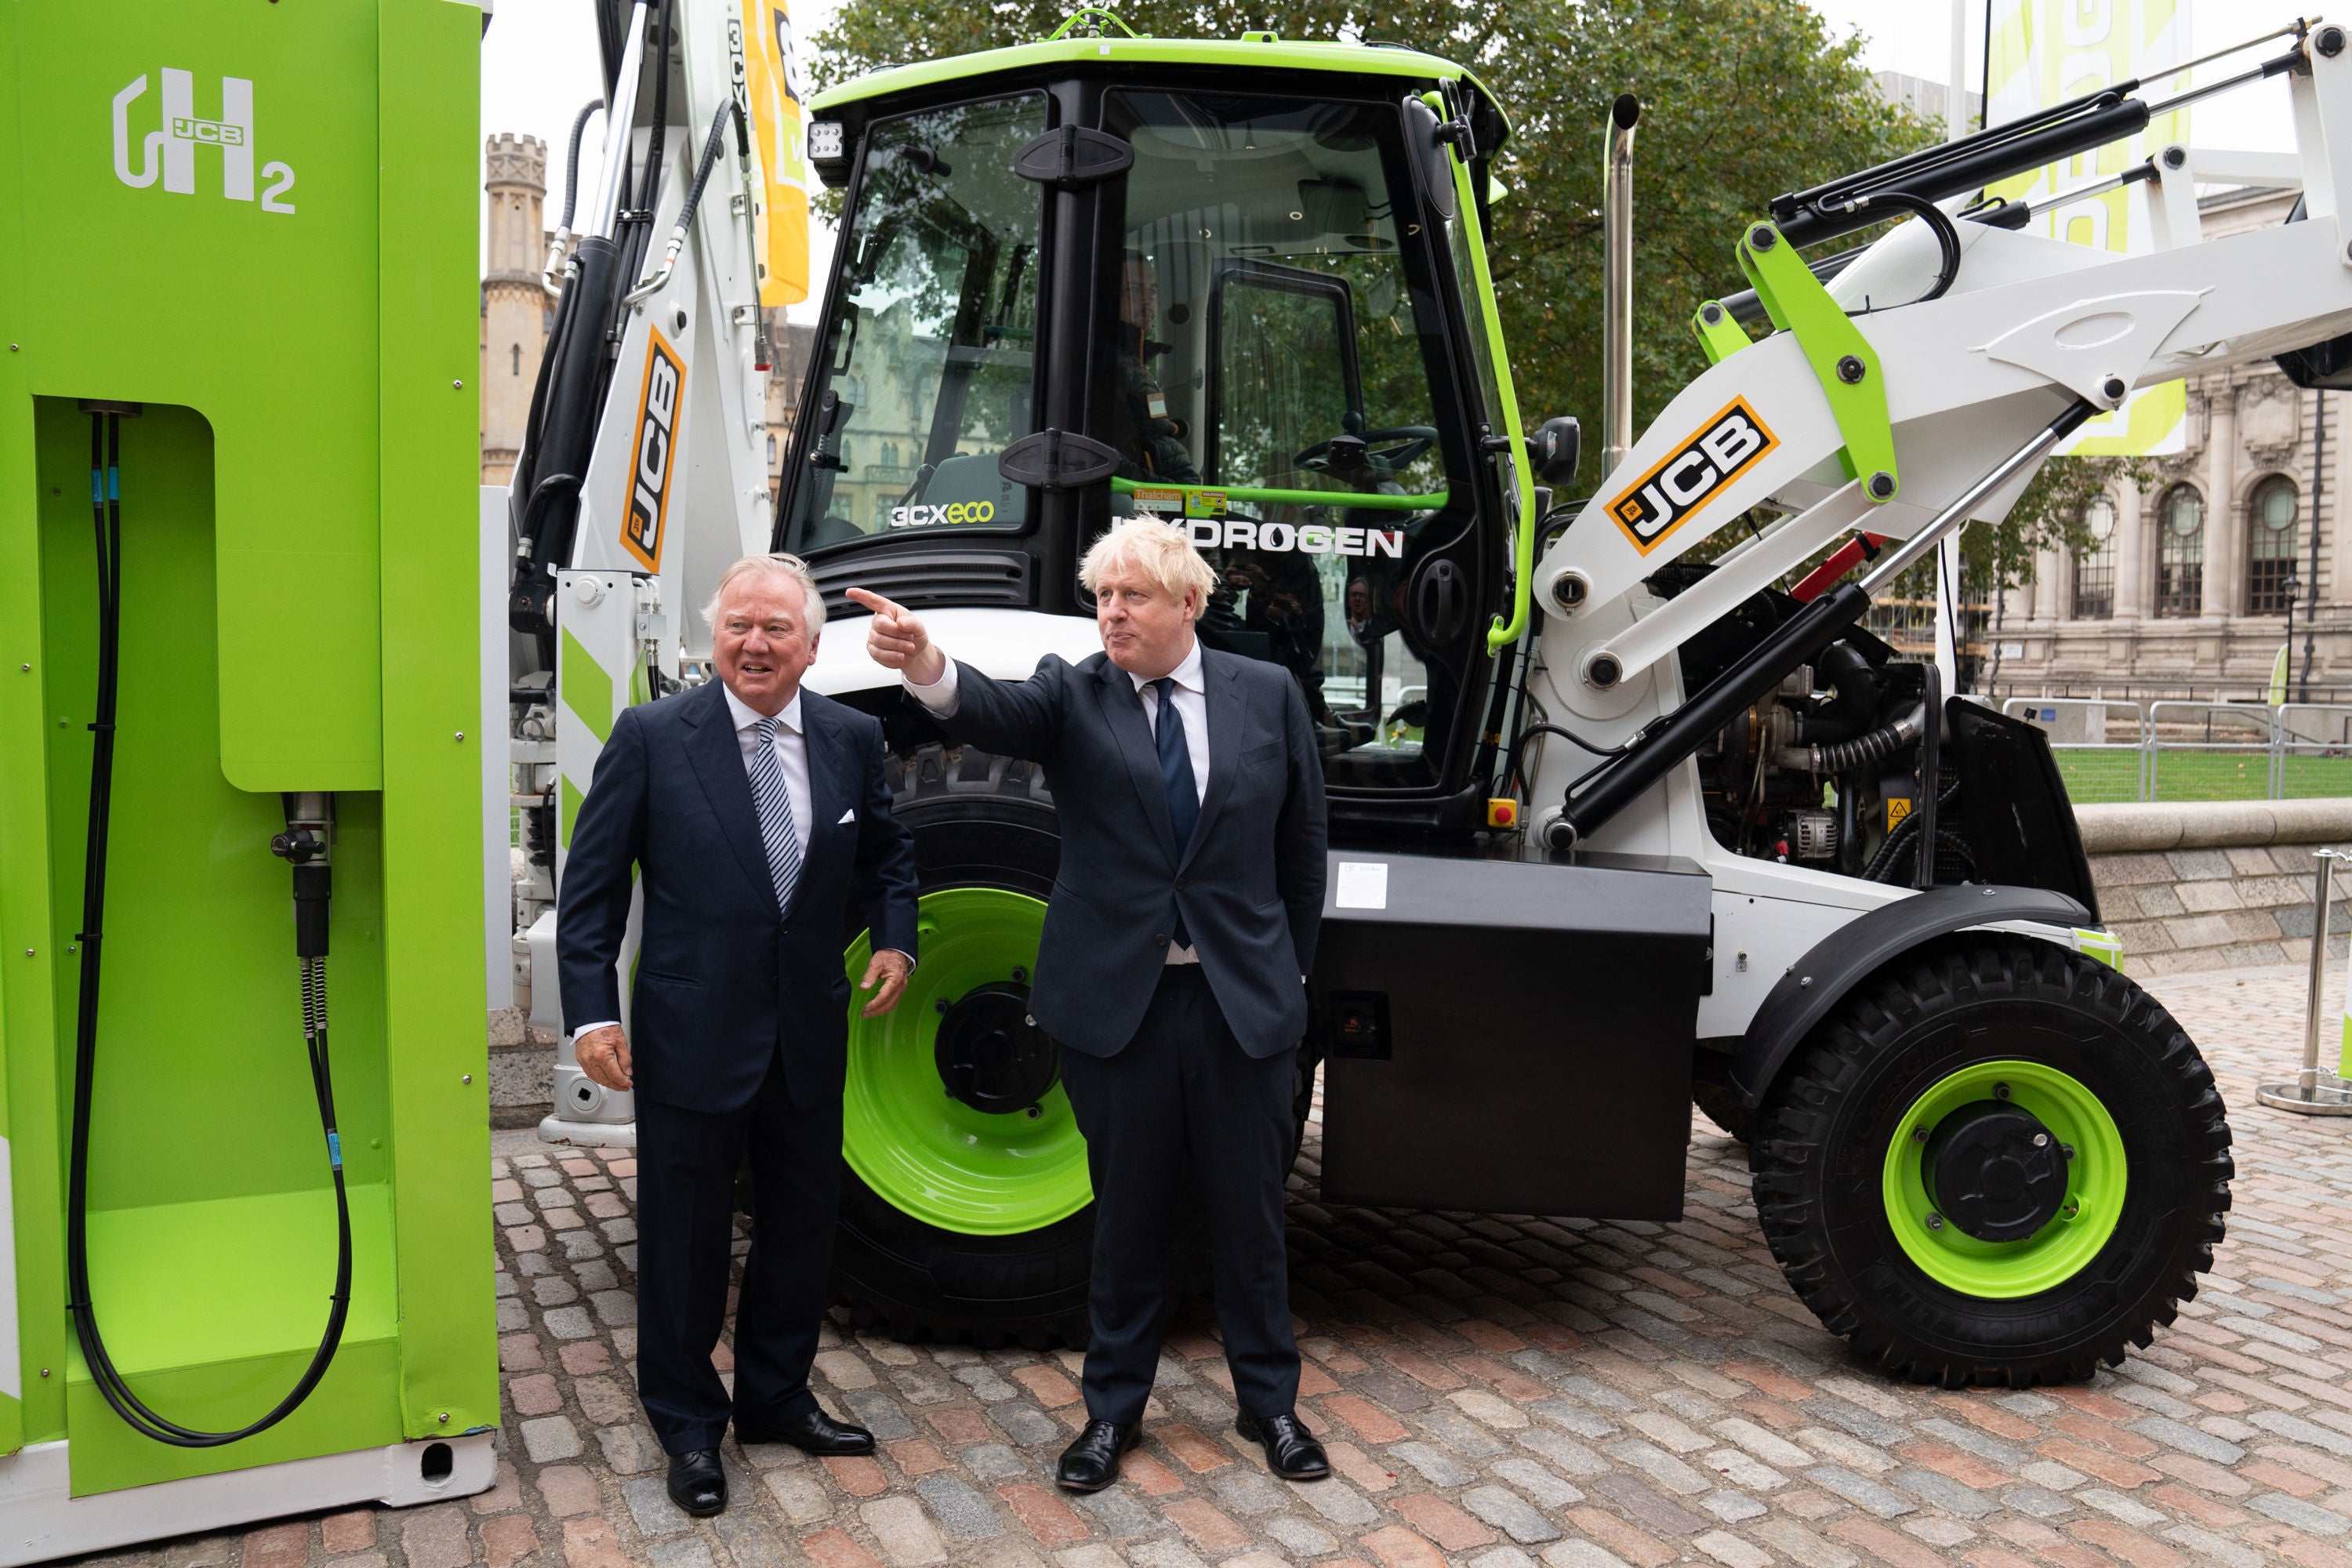 Boris Johnson and JCB chair Lord Bamford at the unveiling of a hydrogen powered JCB Loadall telescopic handler